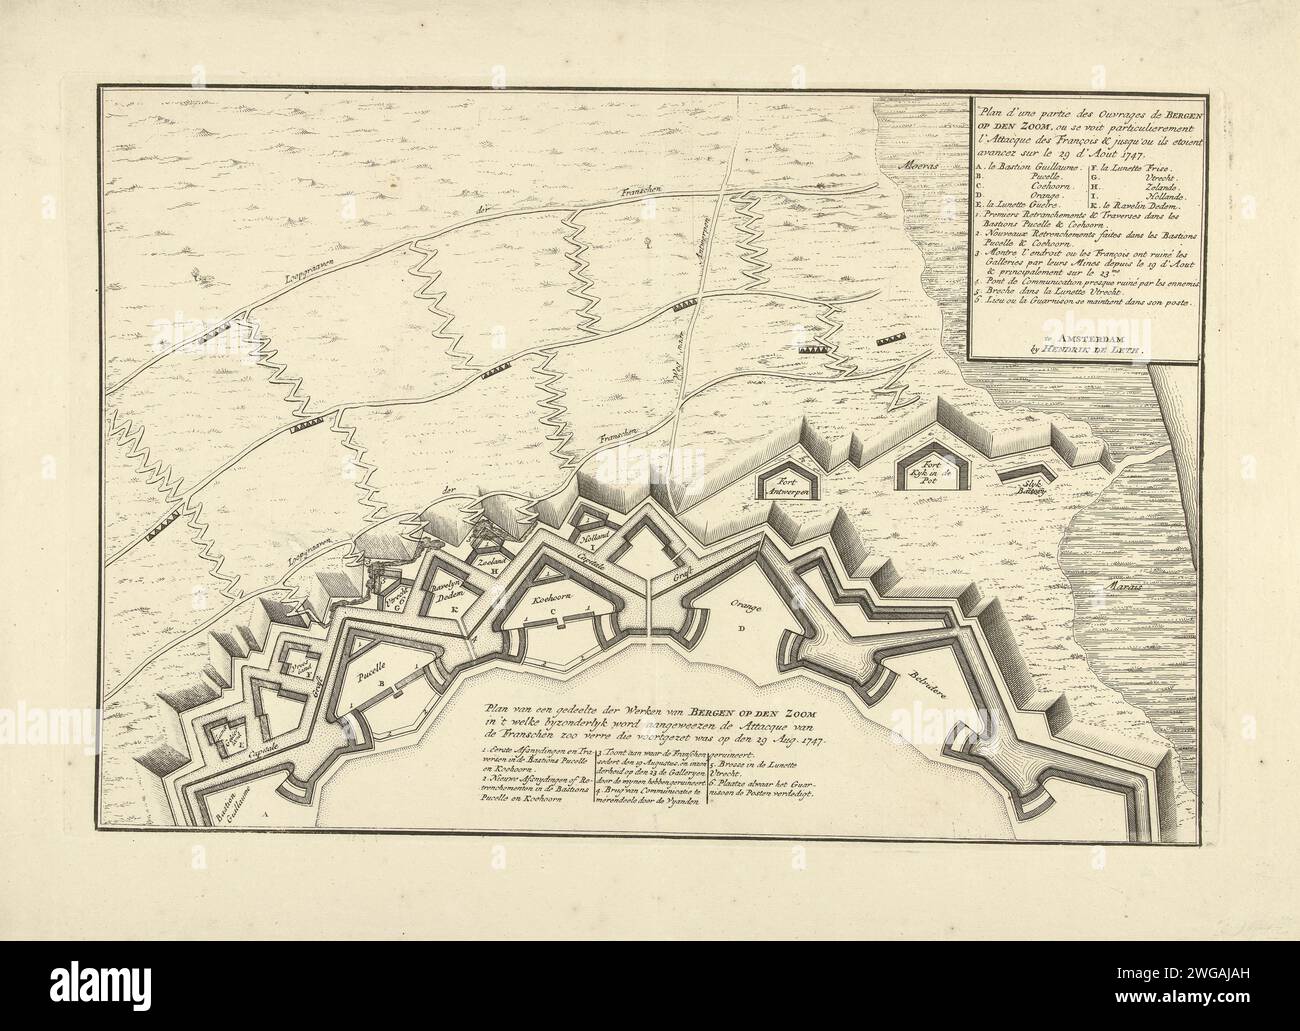 Map of part of the defenses of Bergen op Zoom, 1747, 1747 print Map of part of the defenses with the Bastions, Ravelins and Lunetten van Bergen op Zoom, with the location of the French attack on August 29, 1747. print maker: Northern Netherlandspublisher: Amsterdam paper etching / engraving fortress Bergen op Zoom Stock Photo